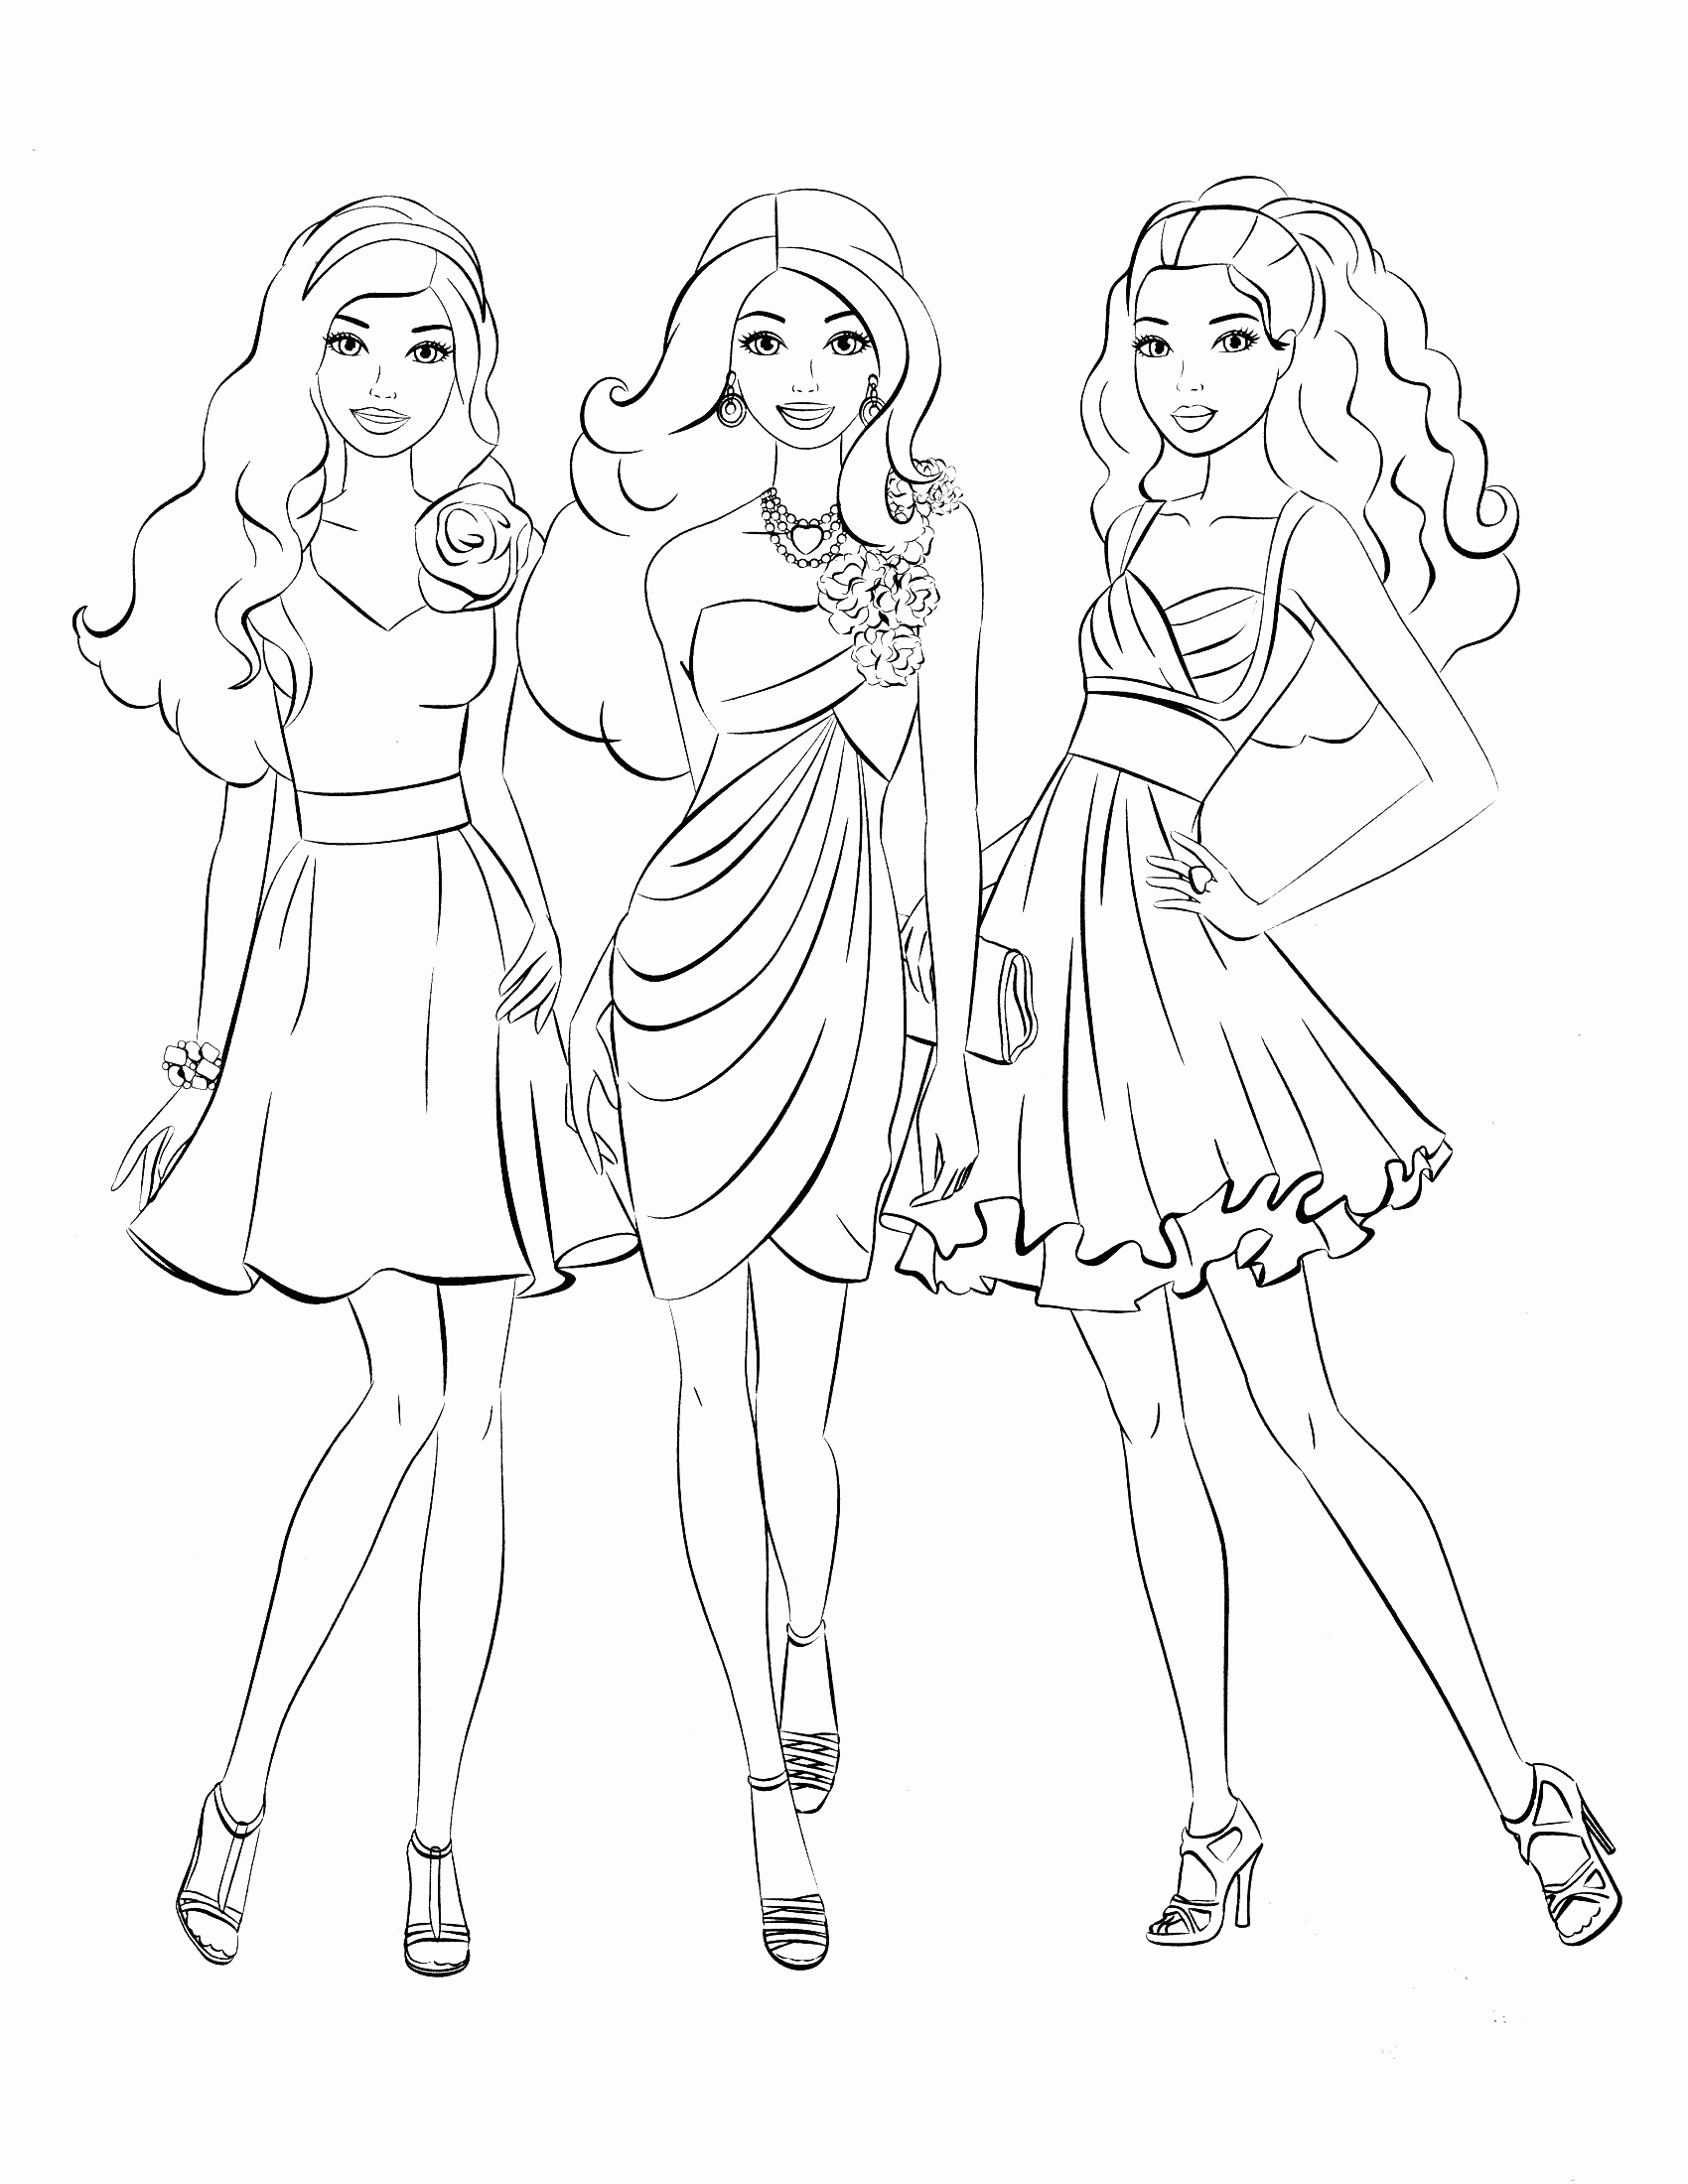 Free Coloring Pages Friends - Coloring Home